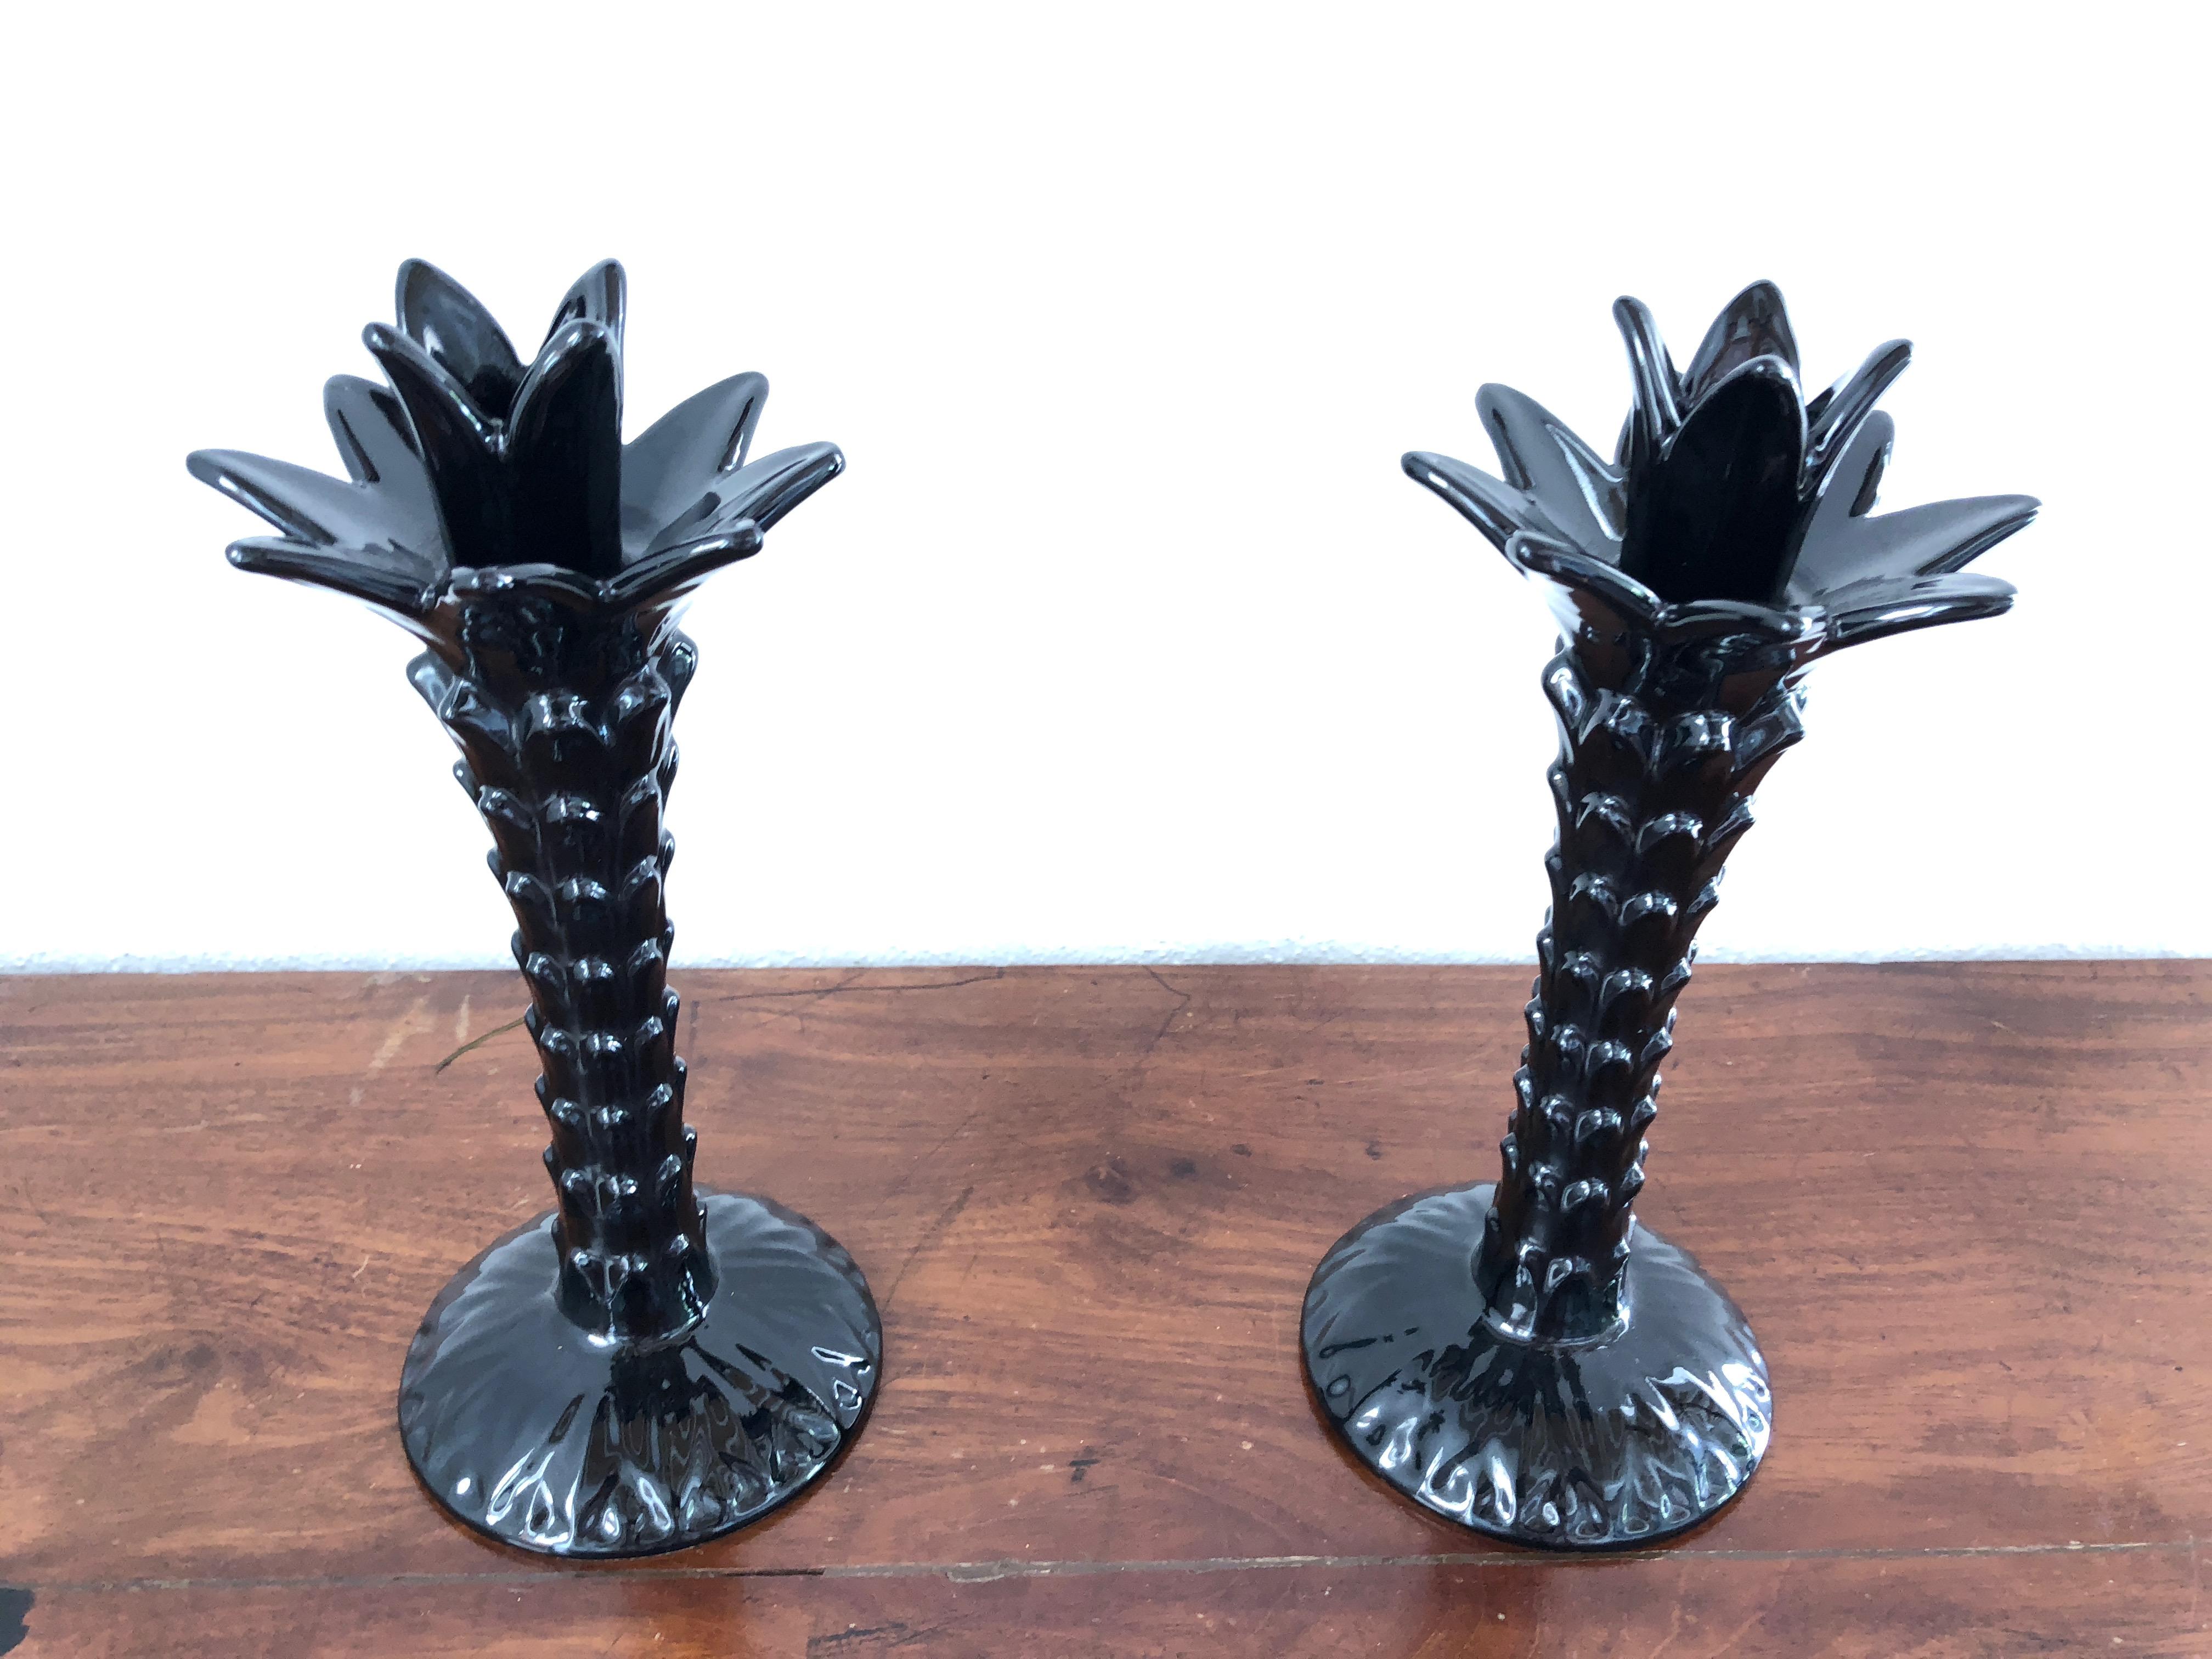 Vintage Tommaso Barbi black ceramic candleholder.
1970s Made in Italy. 

This piece is in near excellent condition. no repairs or chips.

An amazing and seldom piece.